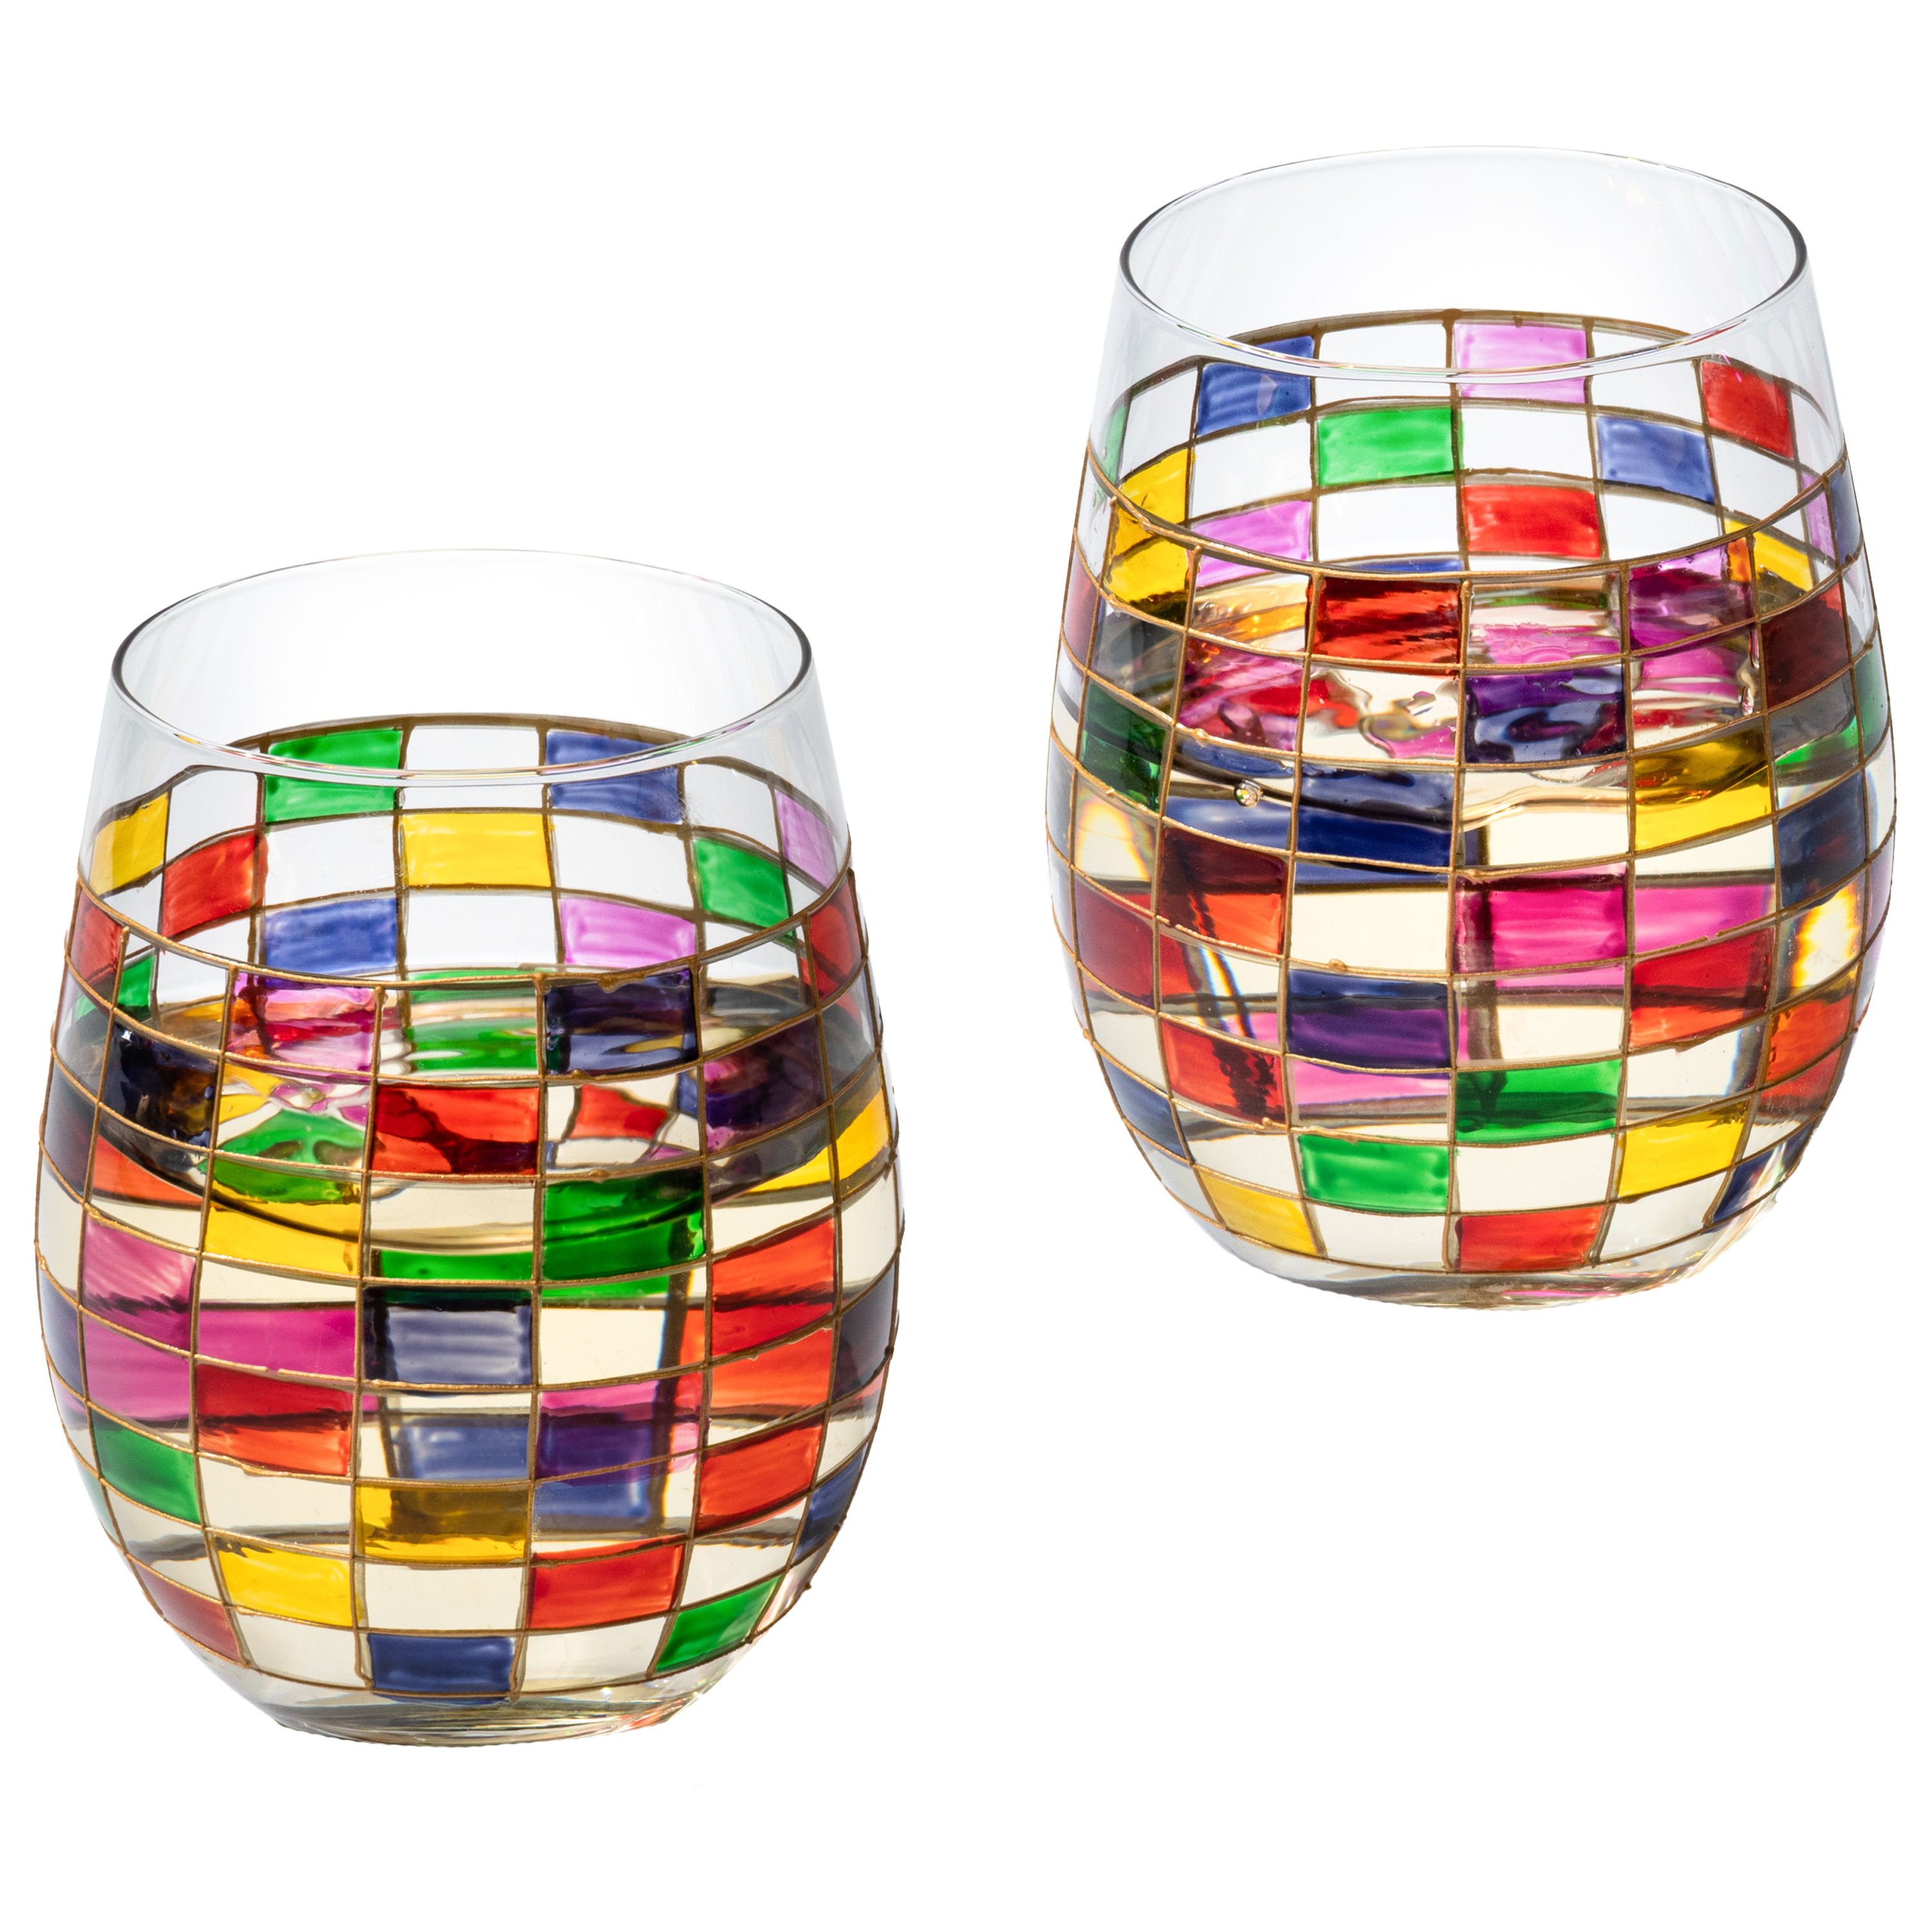 Renaissance Stained Glass Coffee Cup Mug Set of 2 in 2023